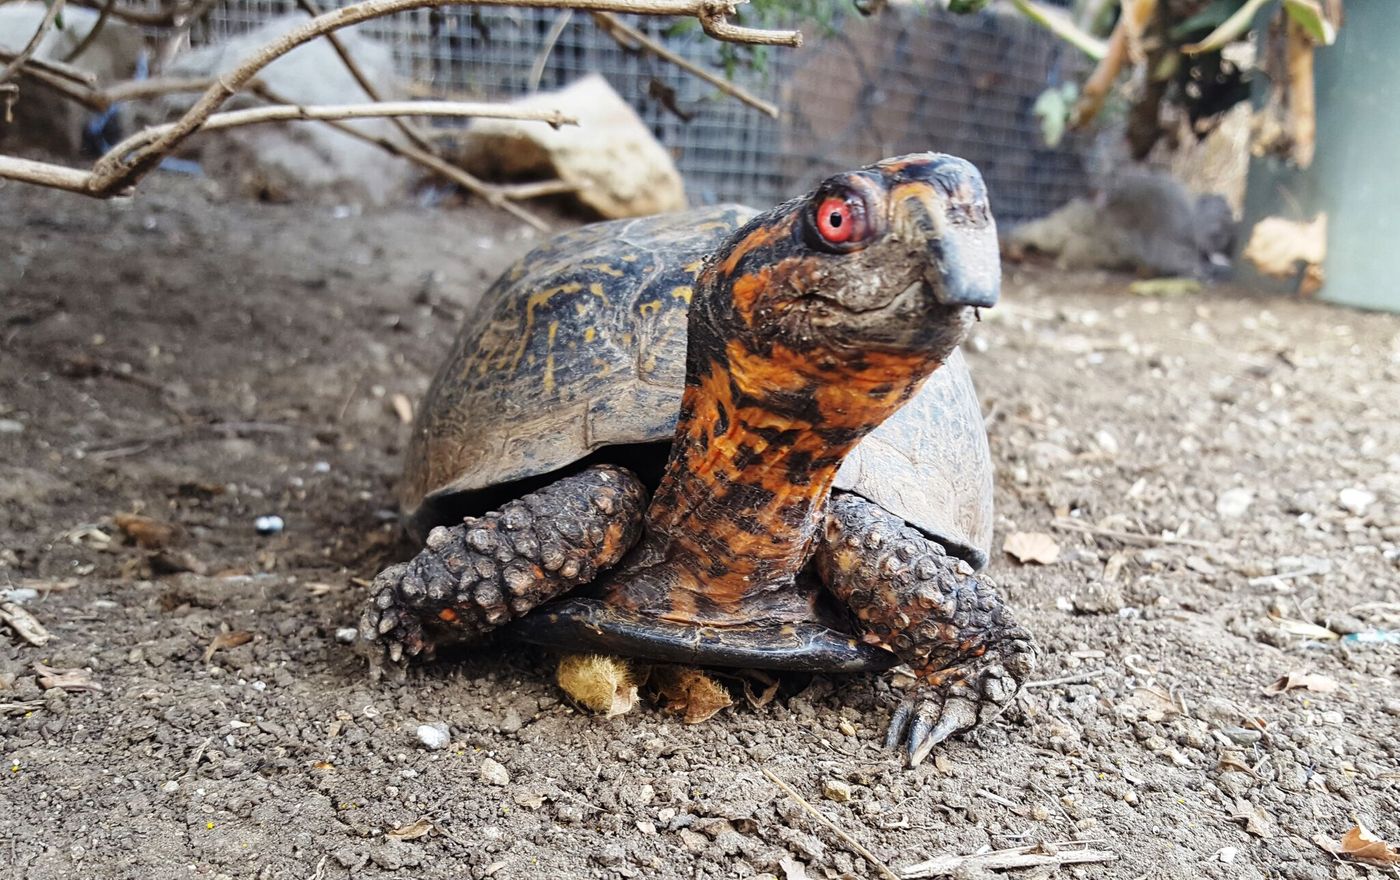 Both tortoises and turtles alike are waning in numbers, and we have to act now to save them.